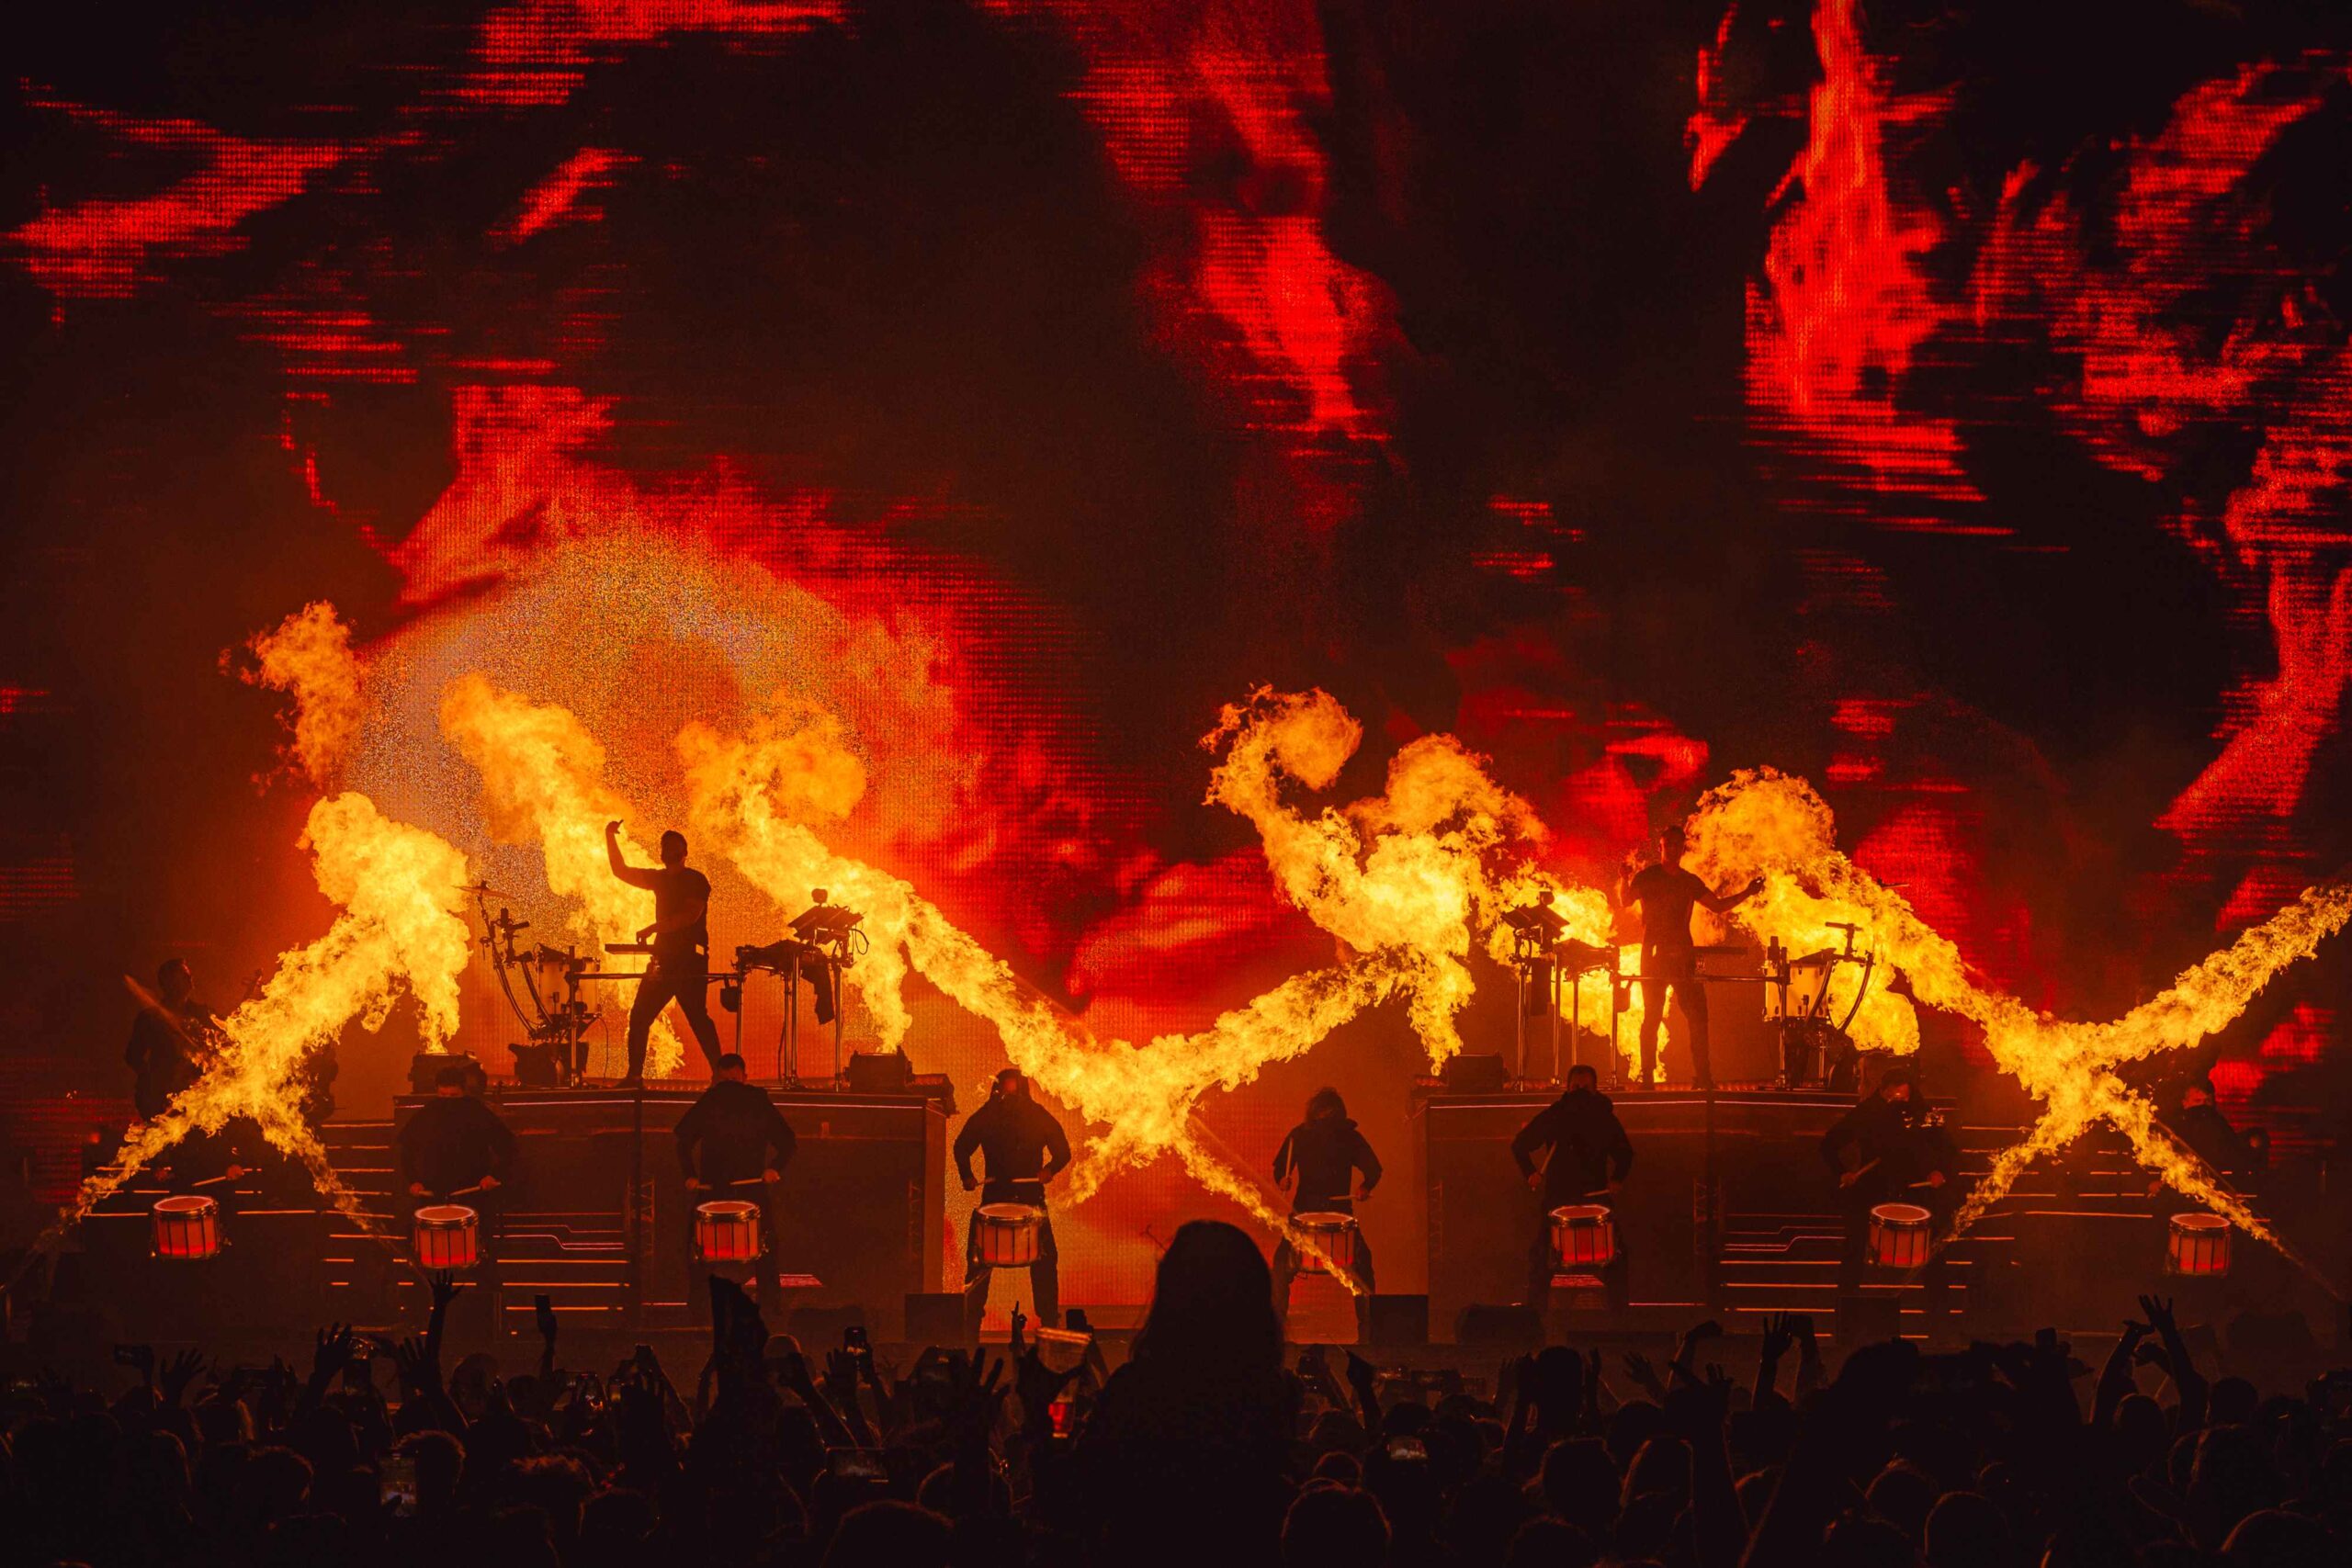 ODESZA kicks off their ‘The Last Goodbye Finale’ tour with b2b sold-out stadium shows in Los Angeles